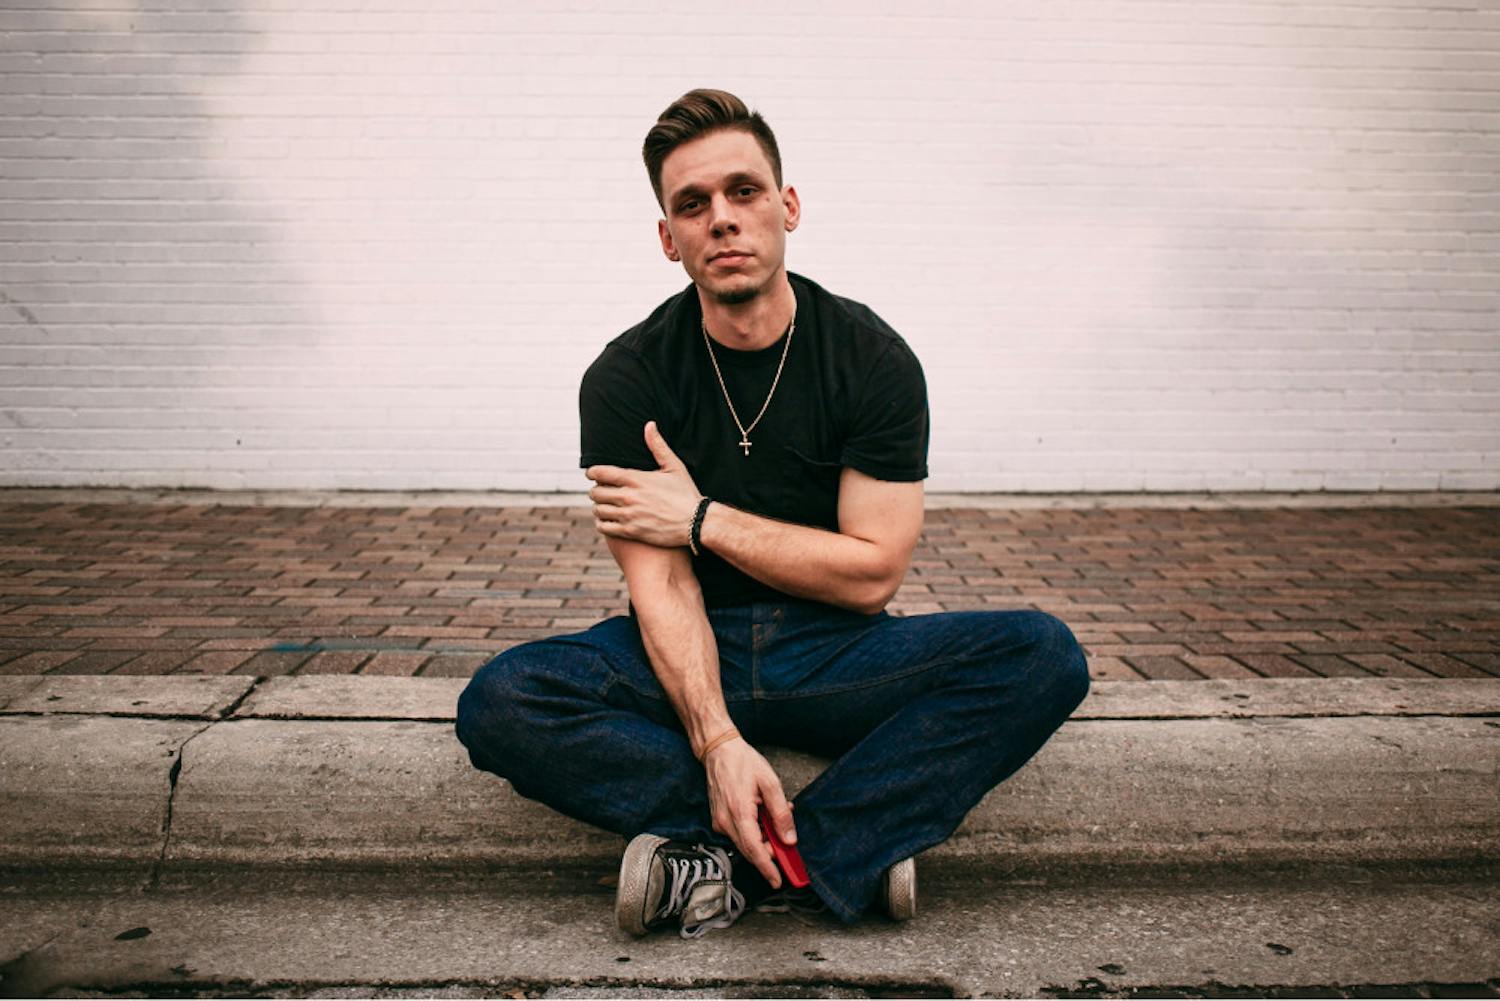 Americana hip-hop artist Danny Pynes is hosting an album release show Friday at The Wooly. Doors open at 8 p.m.